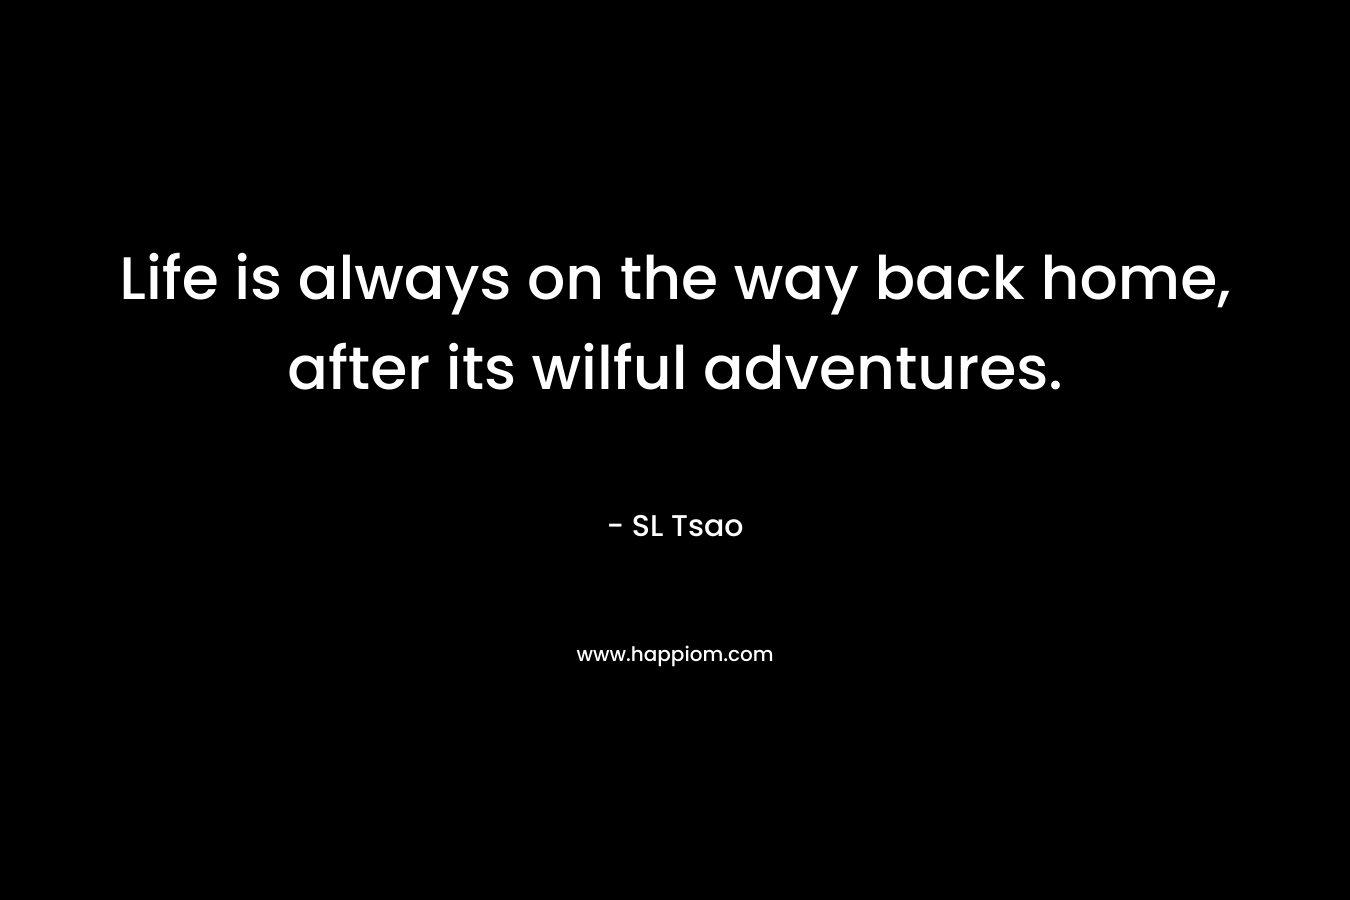 Life is always on the way back home, after its wilful adventures.